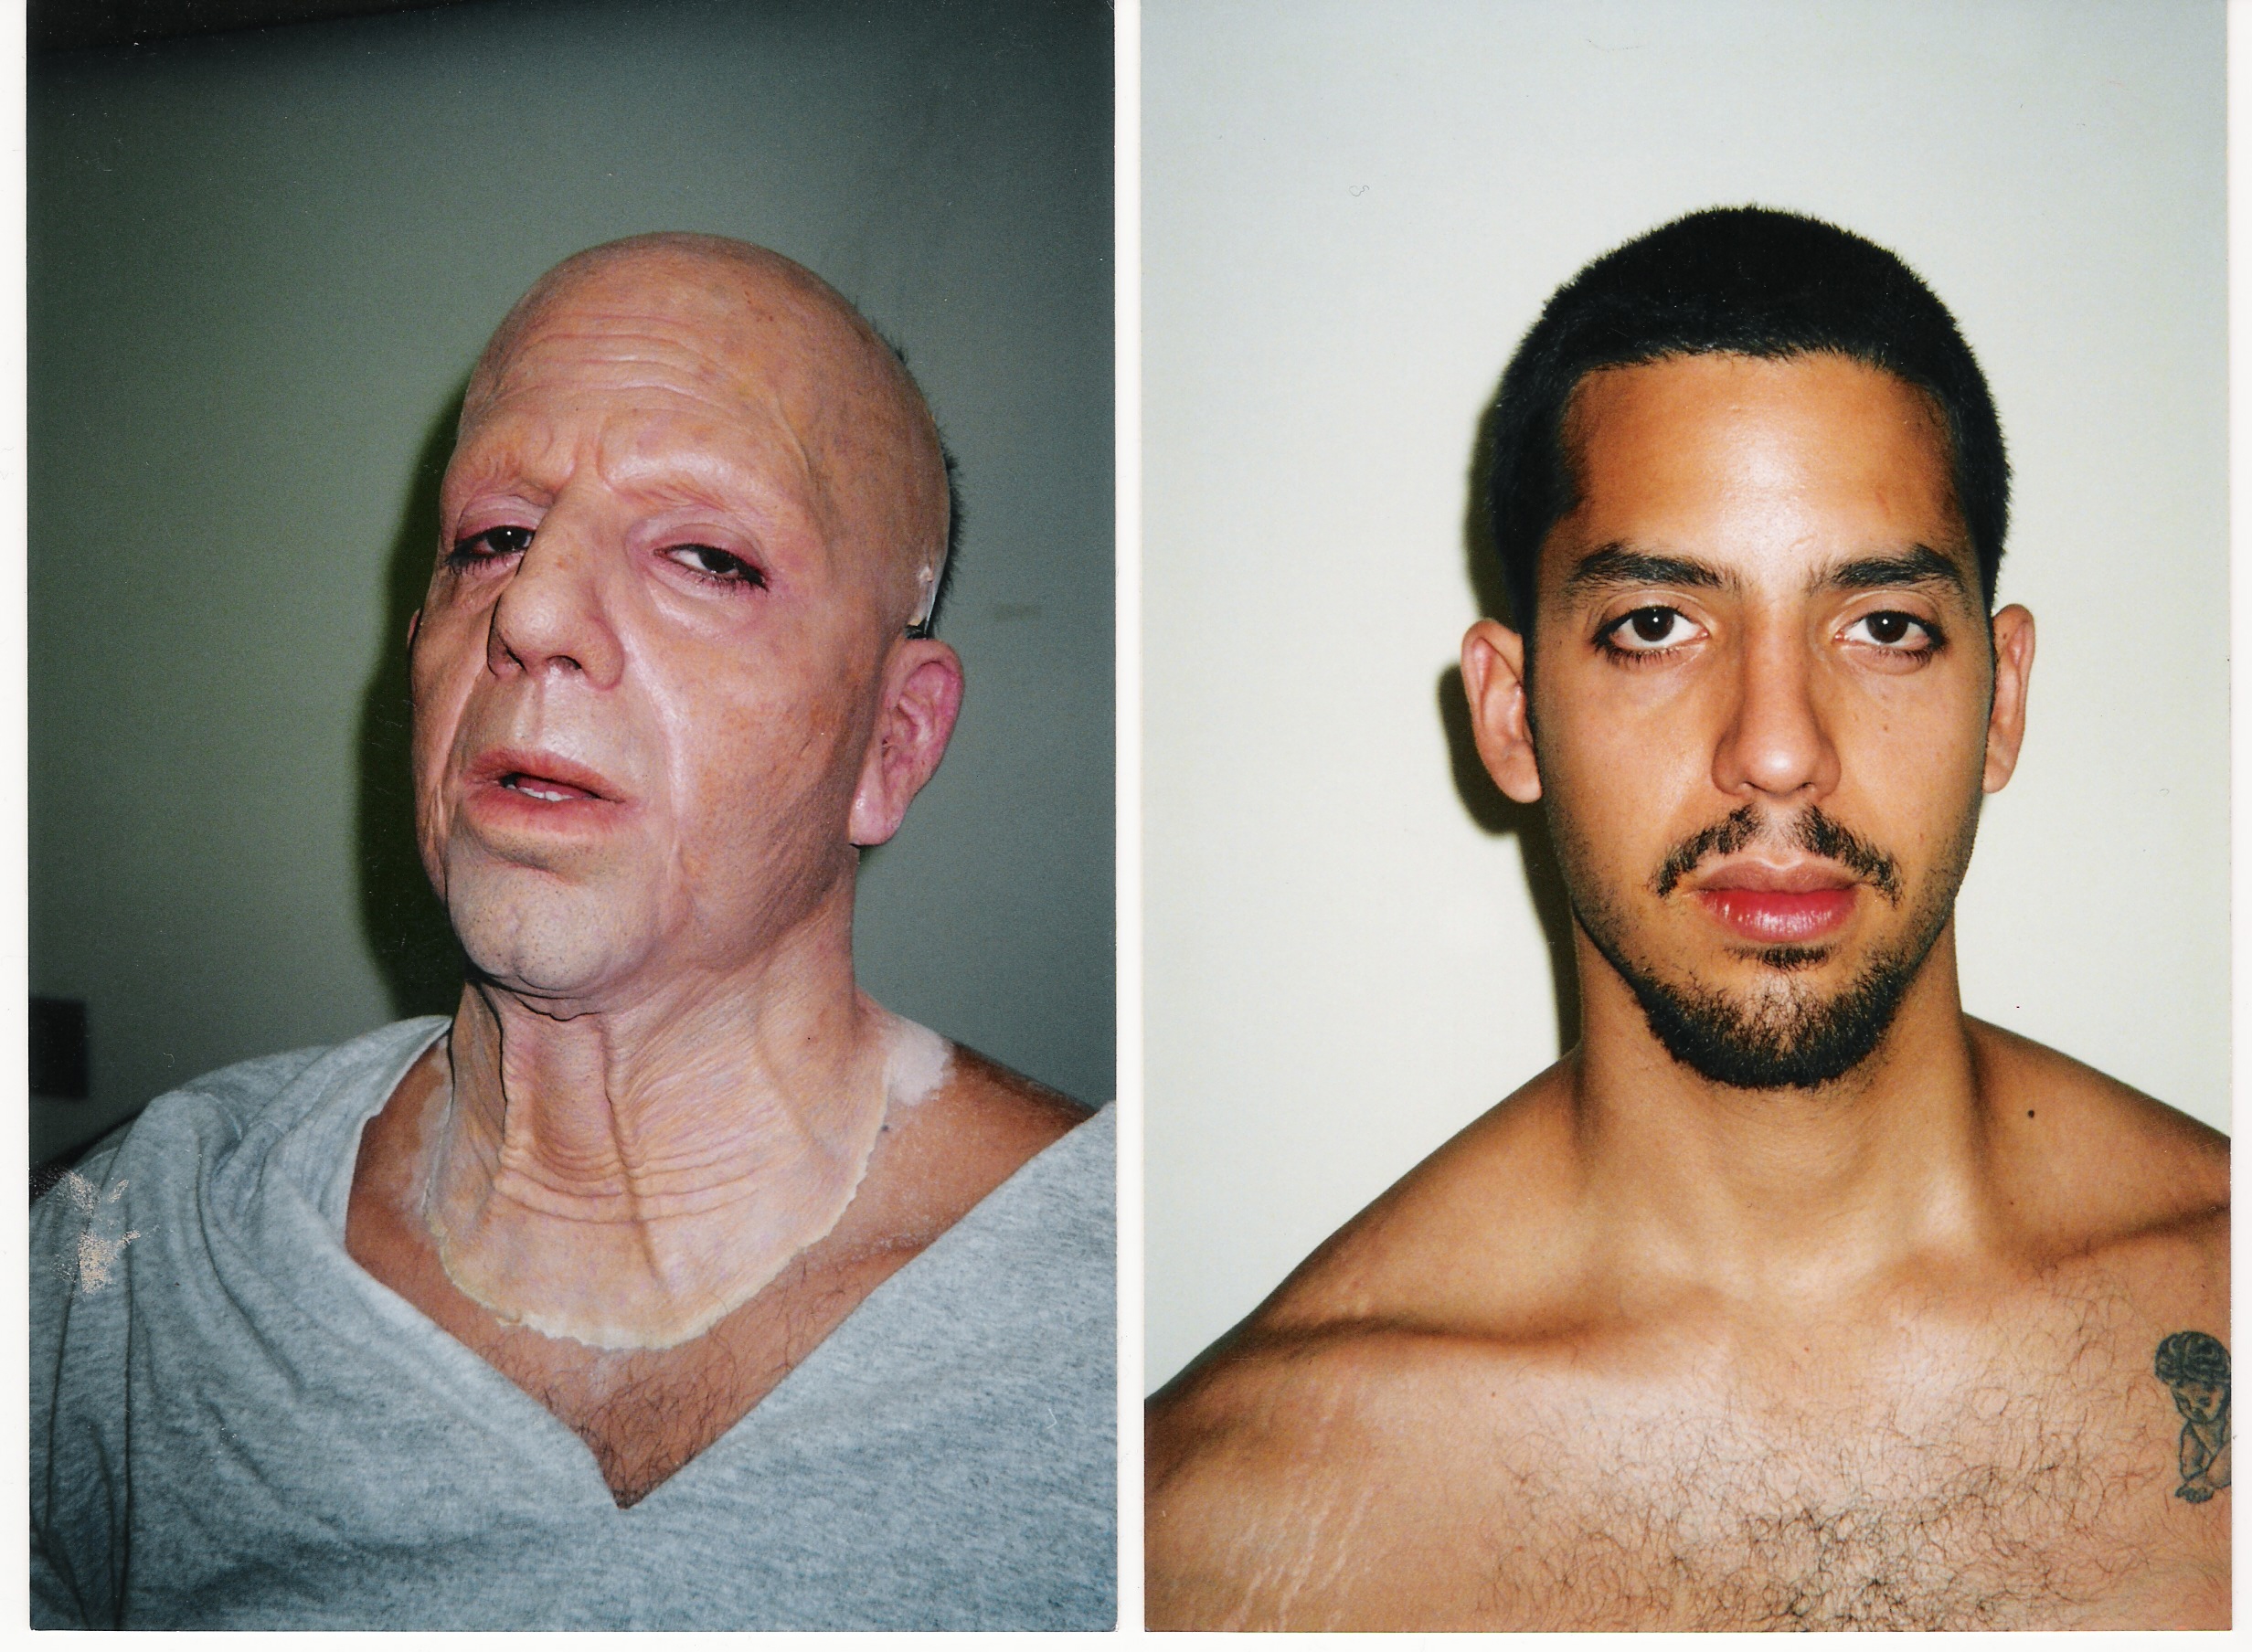 Age transformation with prosthetics for magician David Blaine by Norman Bryn.